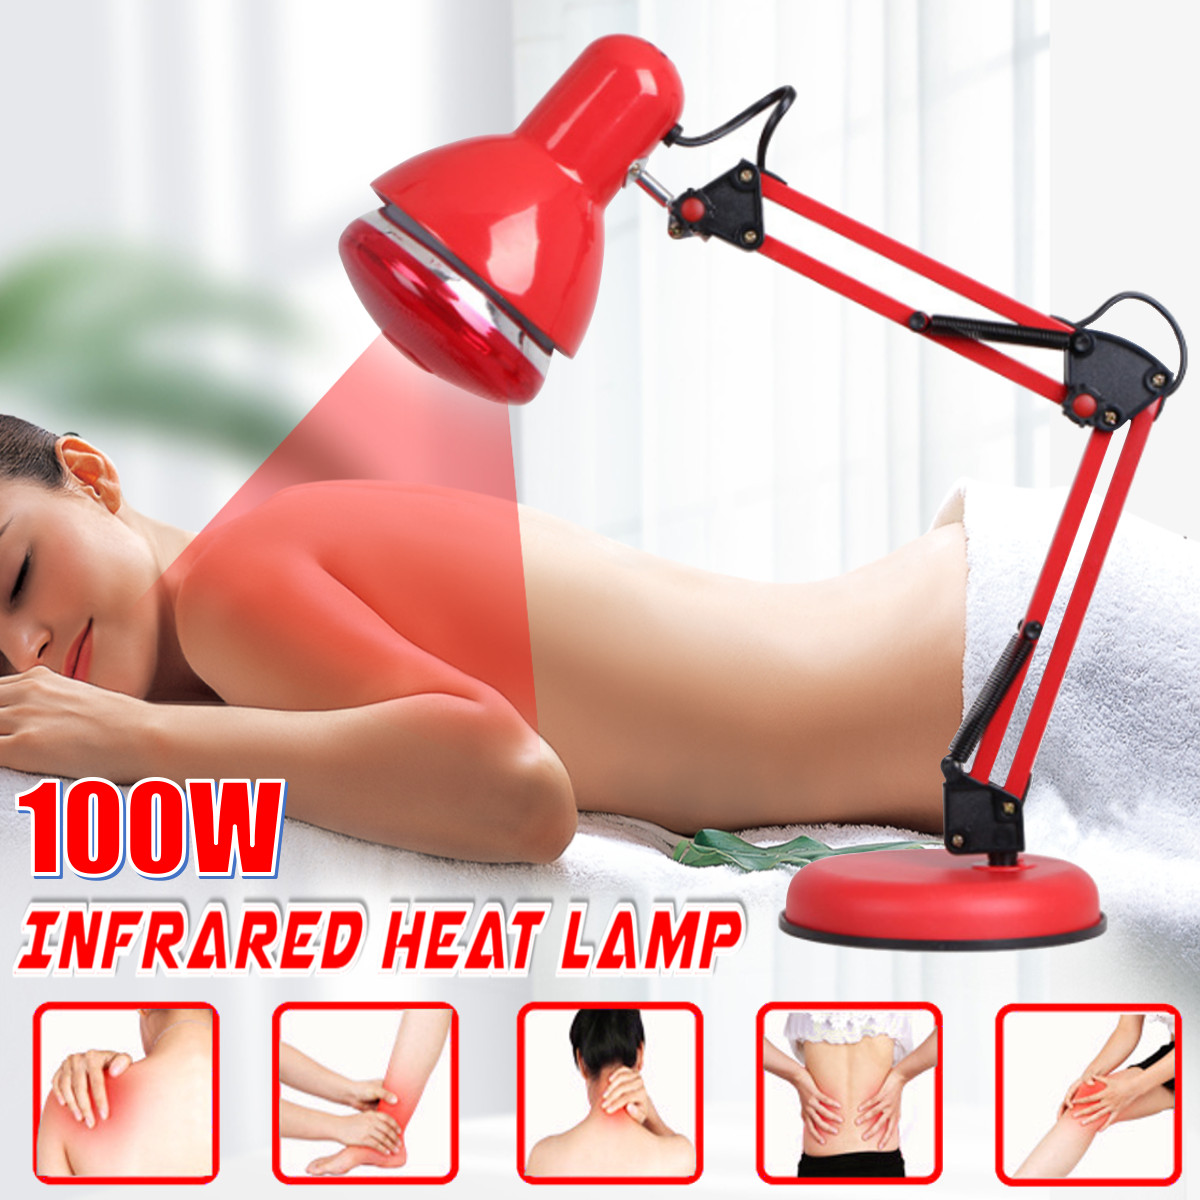 100W-Floor-Stand-Infrared-Therapy-Heat-Lamp-Health-Pain-Relief-Physiotherapy-1776812-1